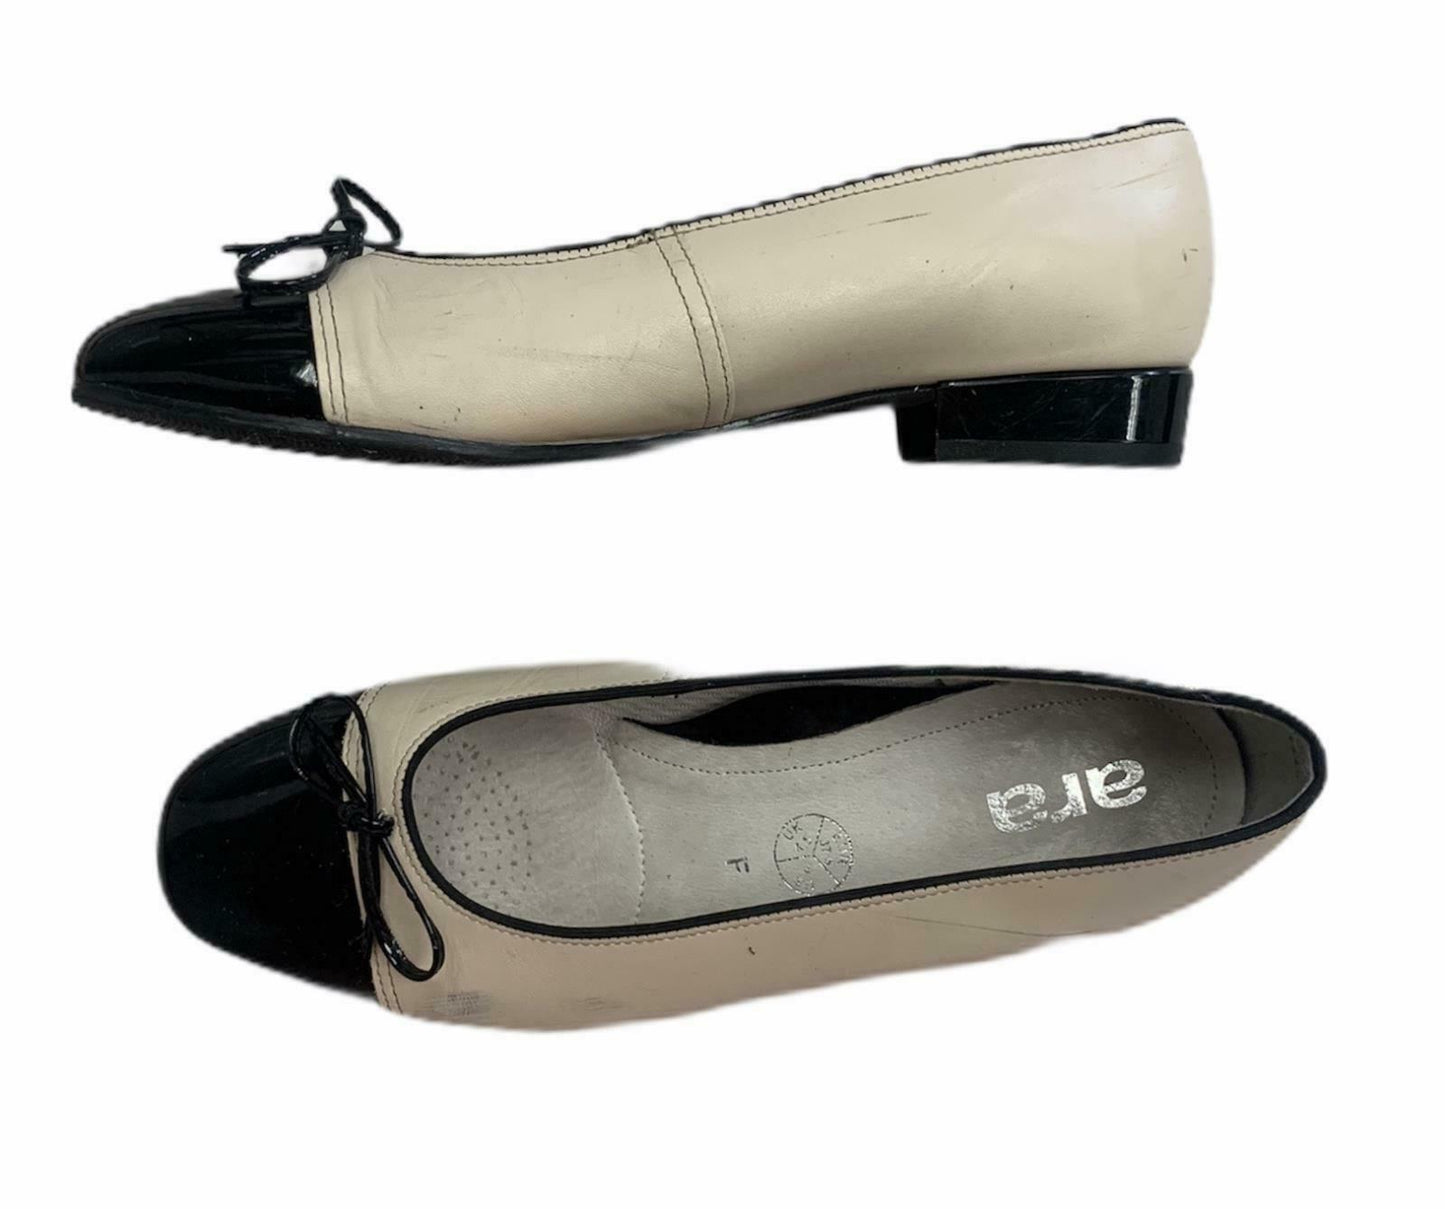 ARA Cap Toe Pumps Block Heels Leather Comfort Size 7 US 4.5 UK Black Ivory - Premium Clothing, Shoes & Accessories:Women:Women's Shoes:Heels from ara - Just $18.17! Shop now at Finds For You